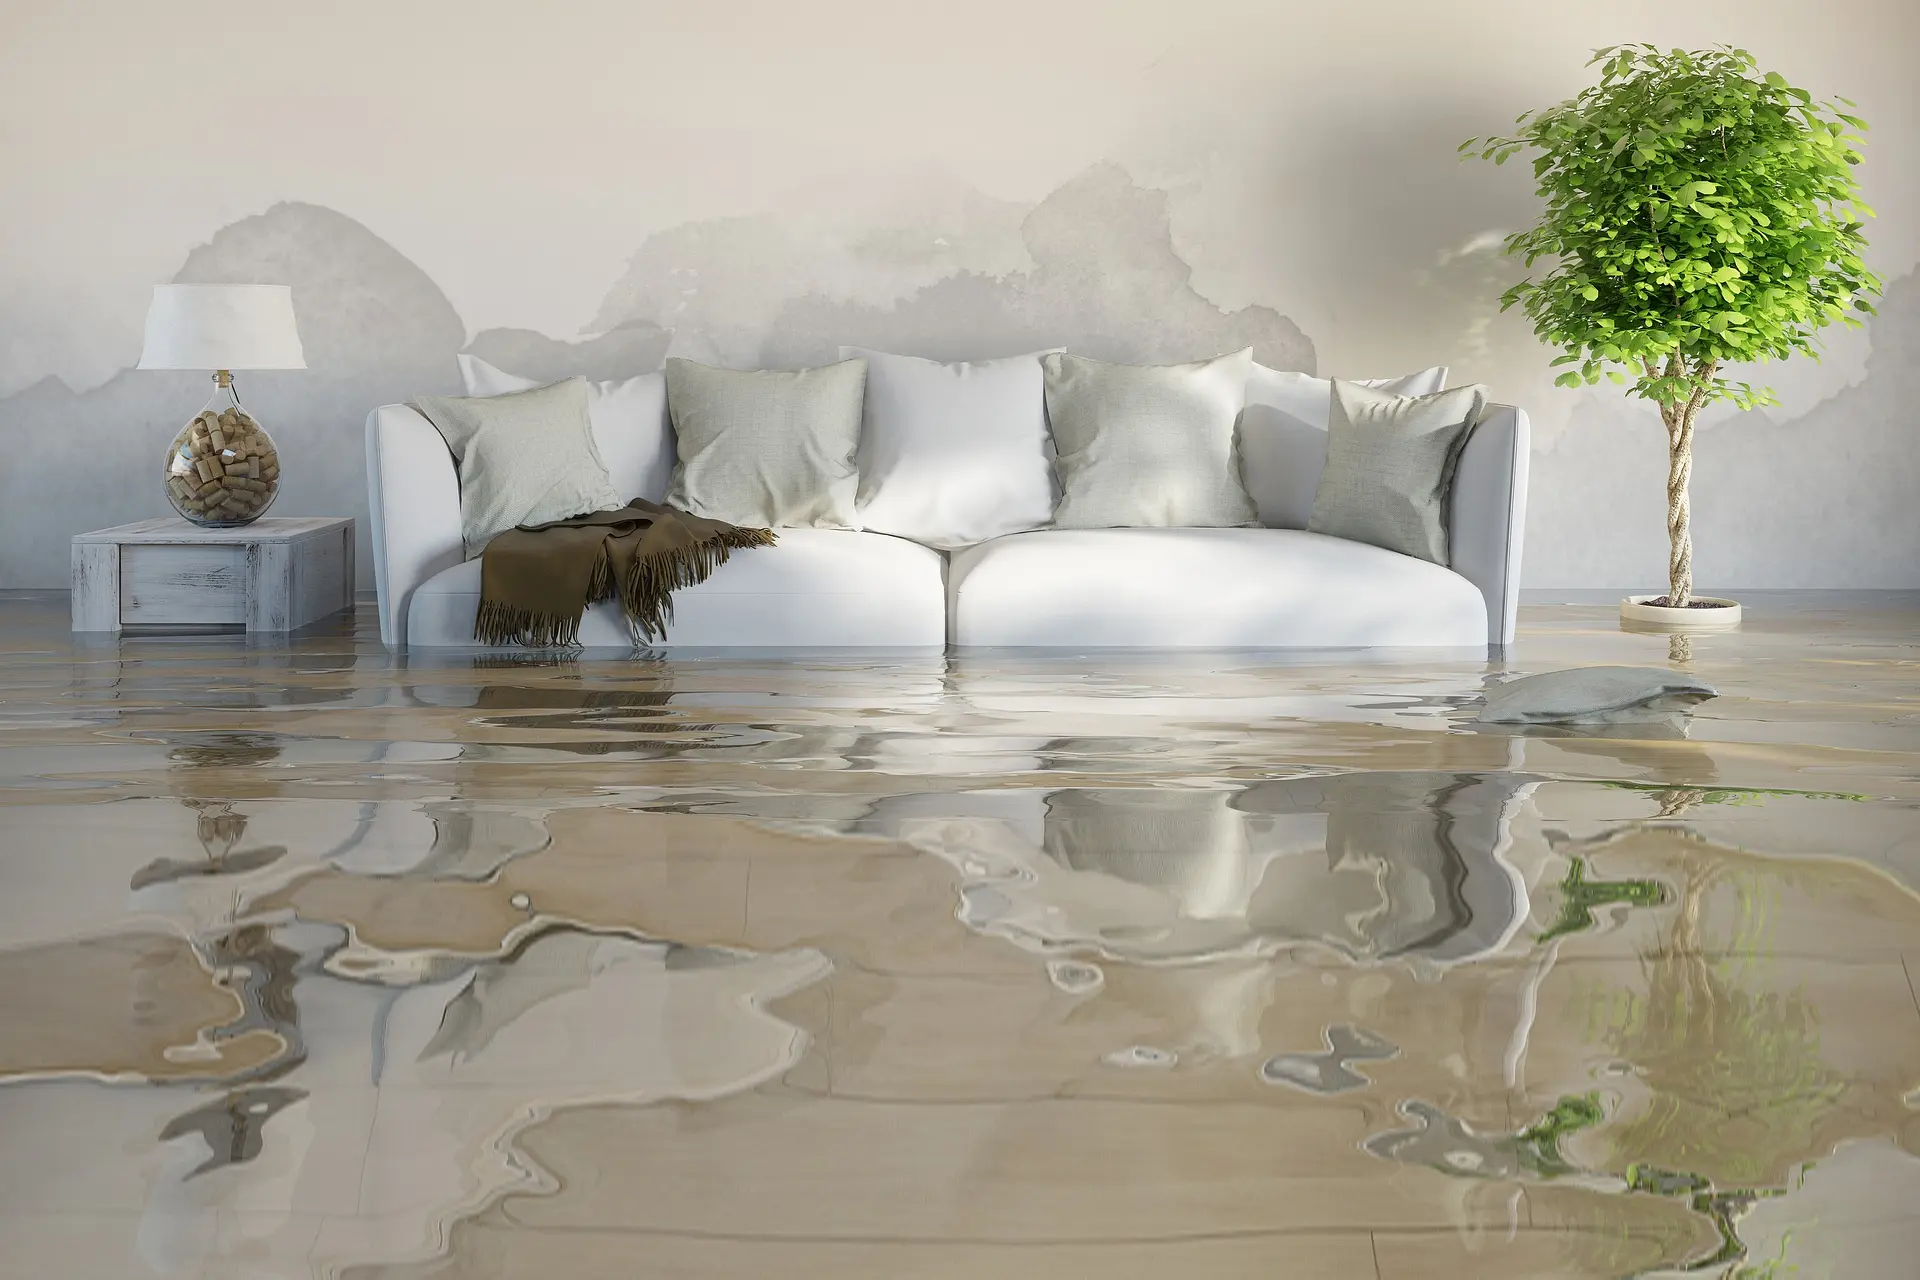 How to Handle Water Damage Emergencies: Professional Restoration Services in Frisco Texas